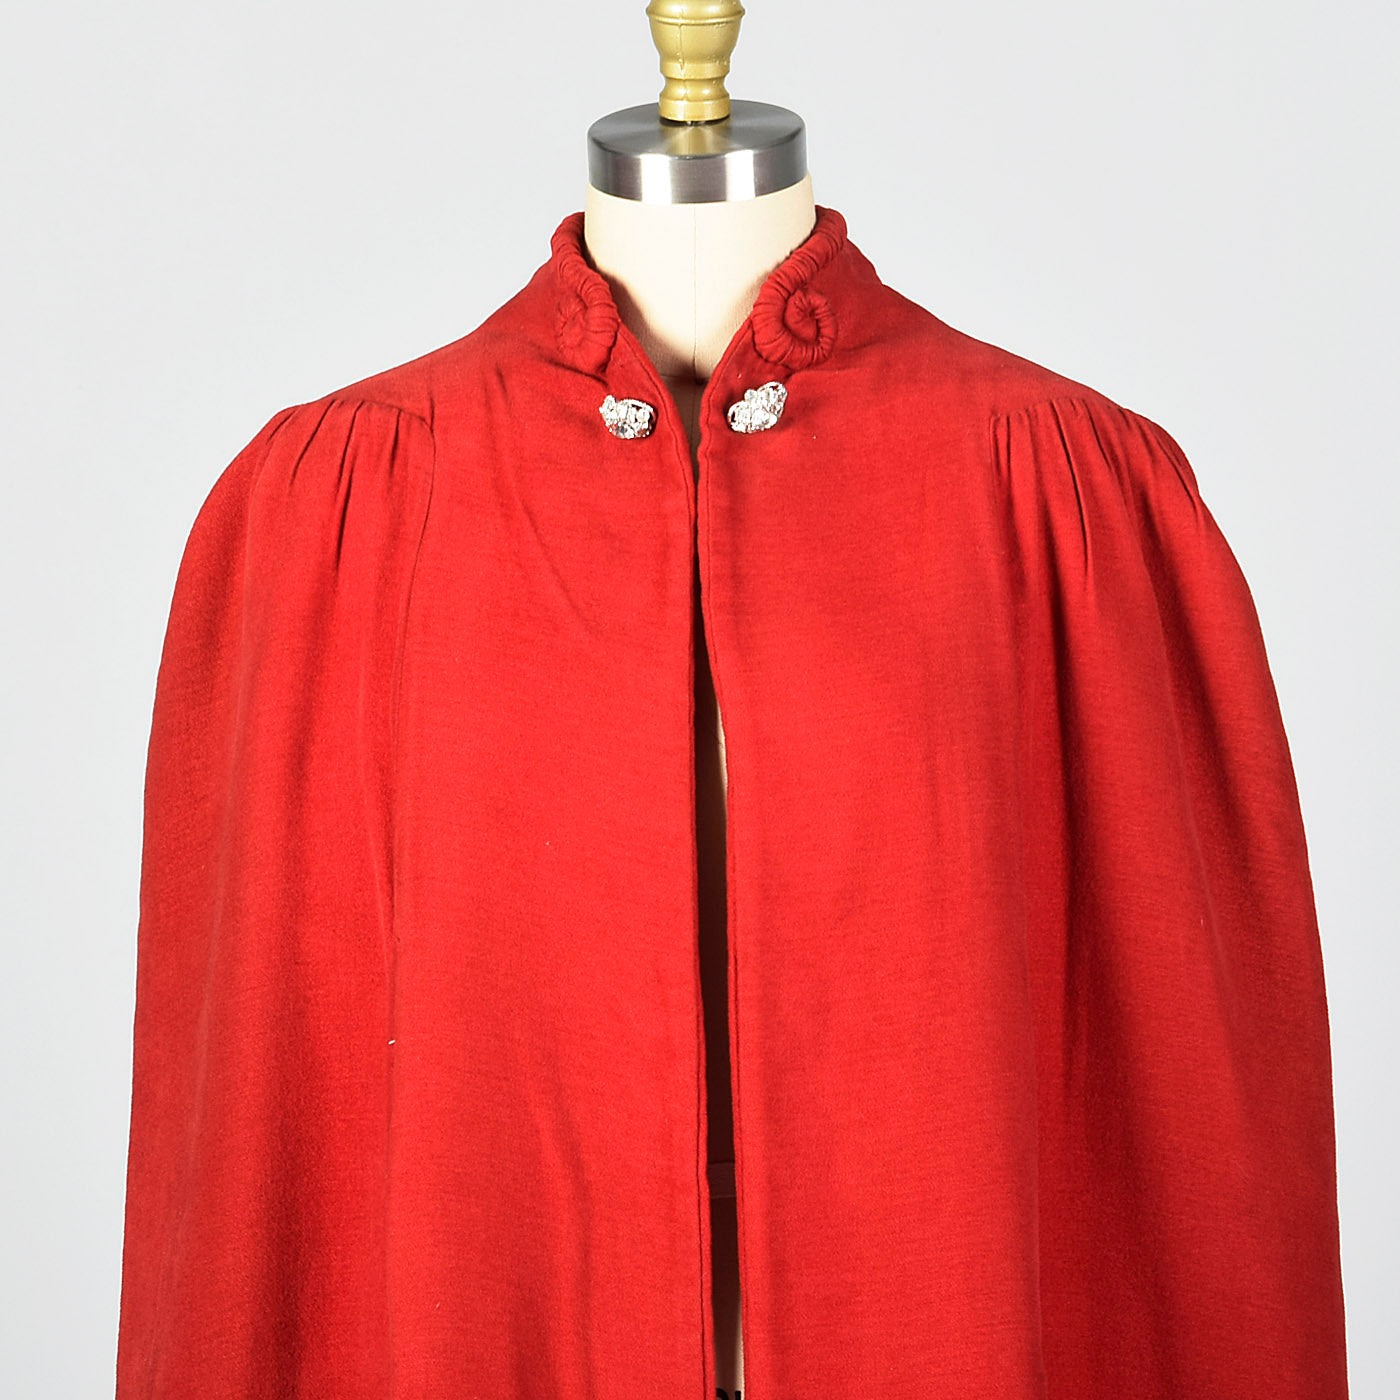 1940s Red Cape with Cocoon Shape